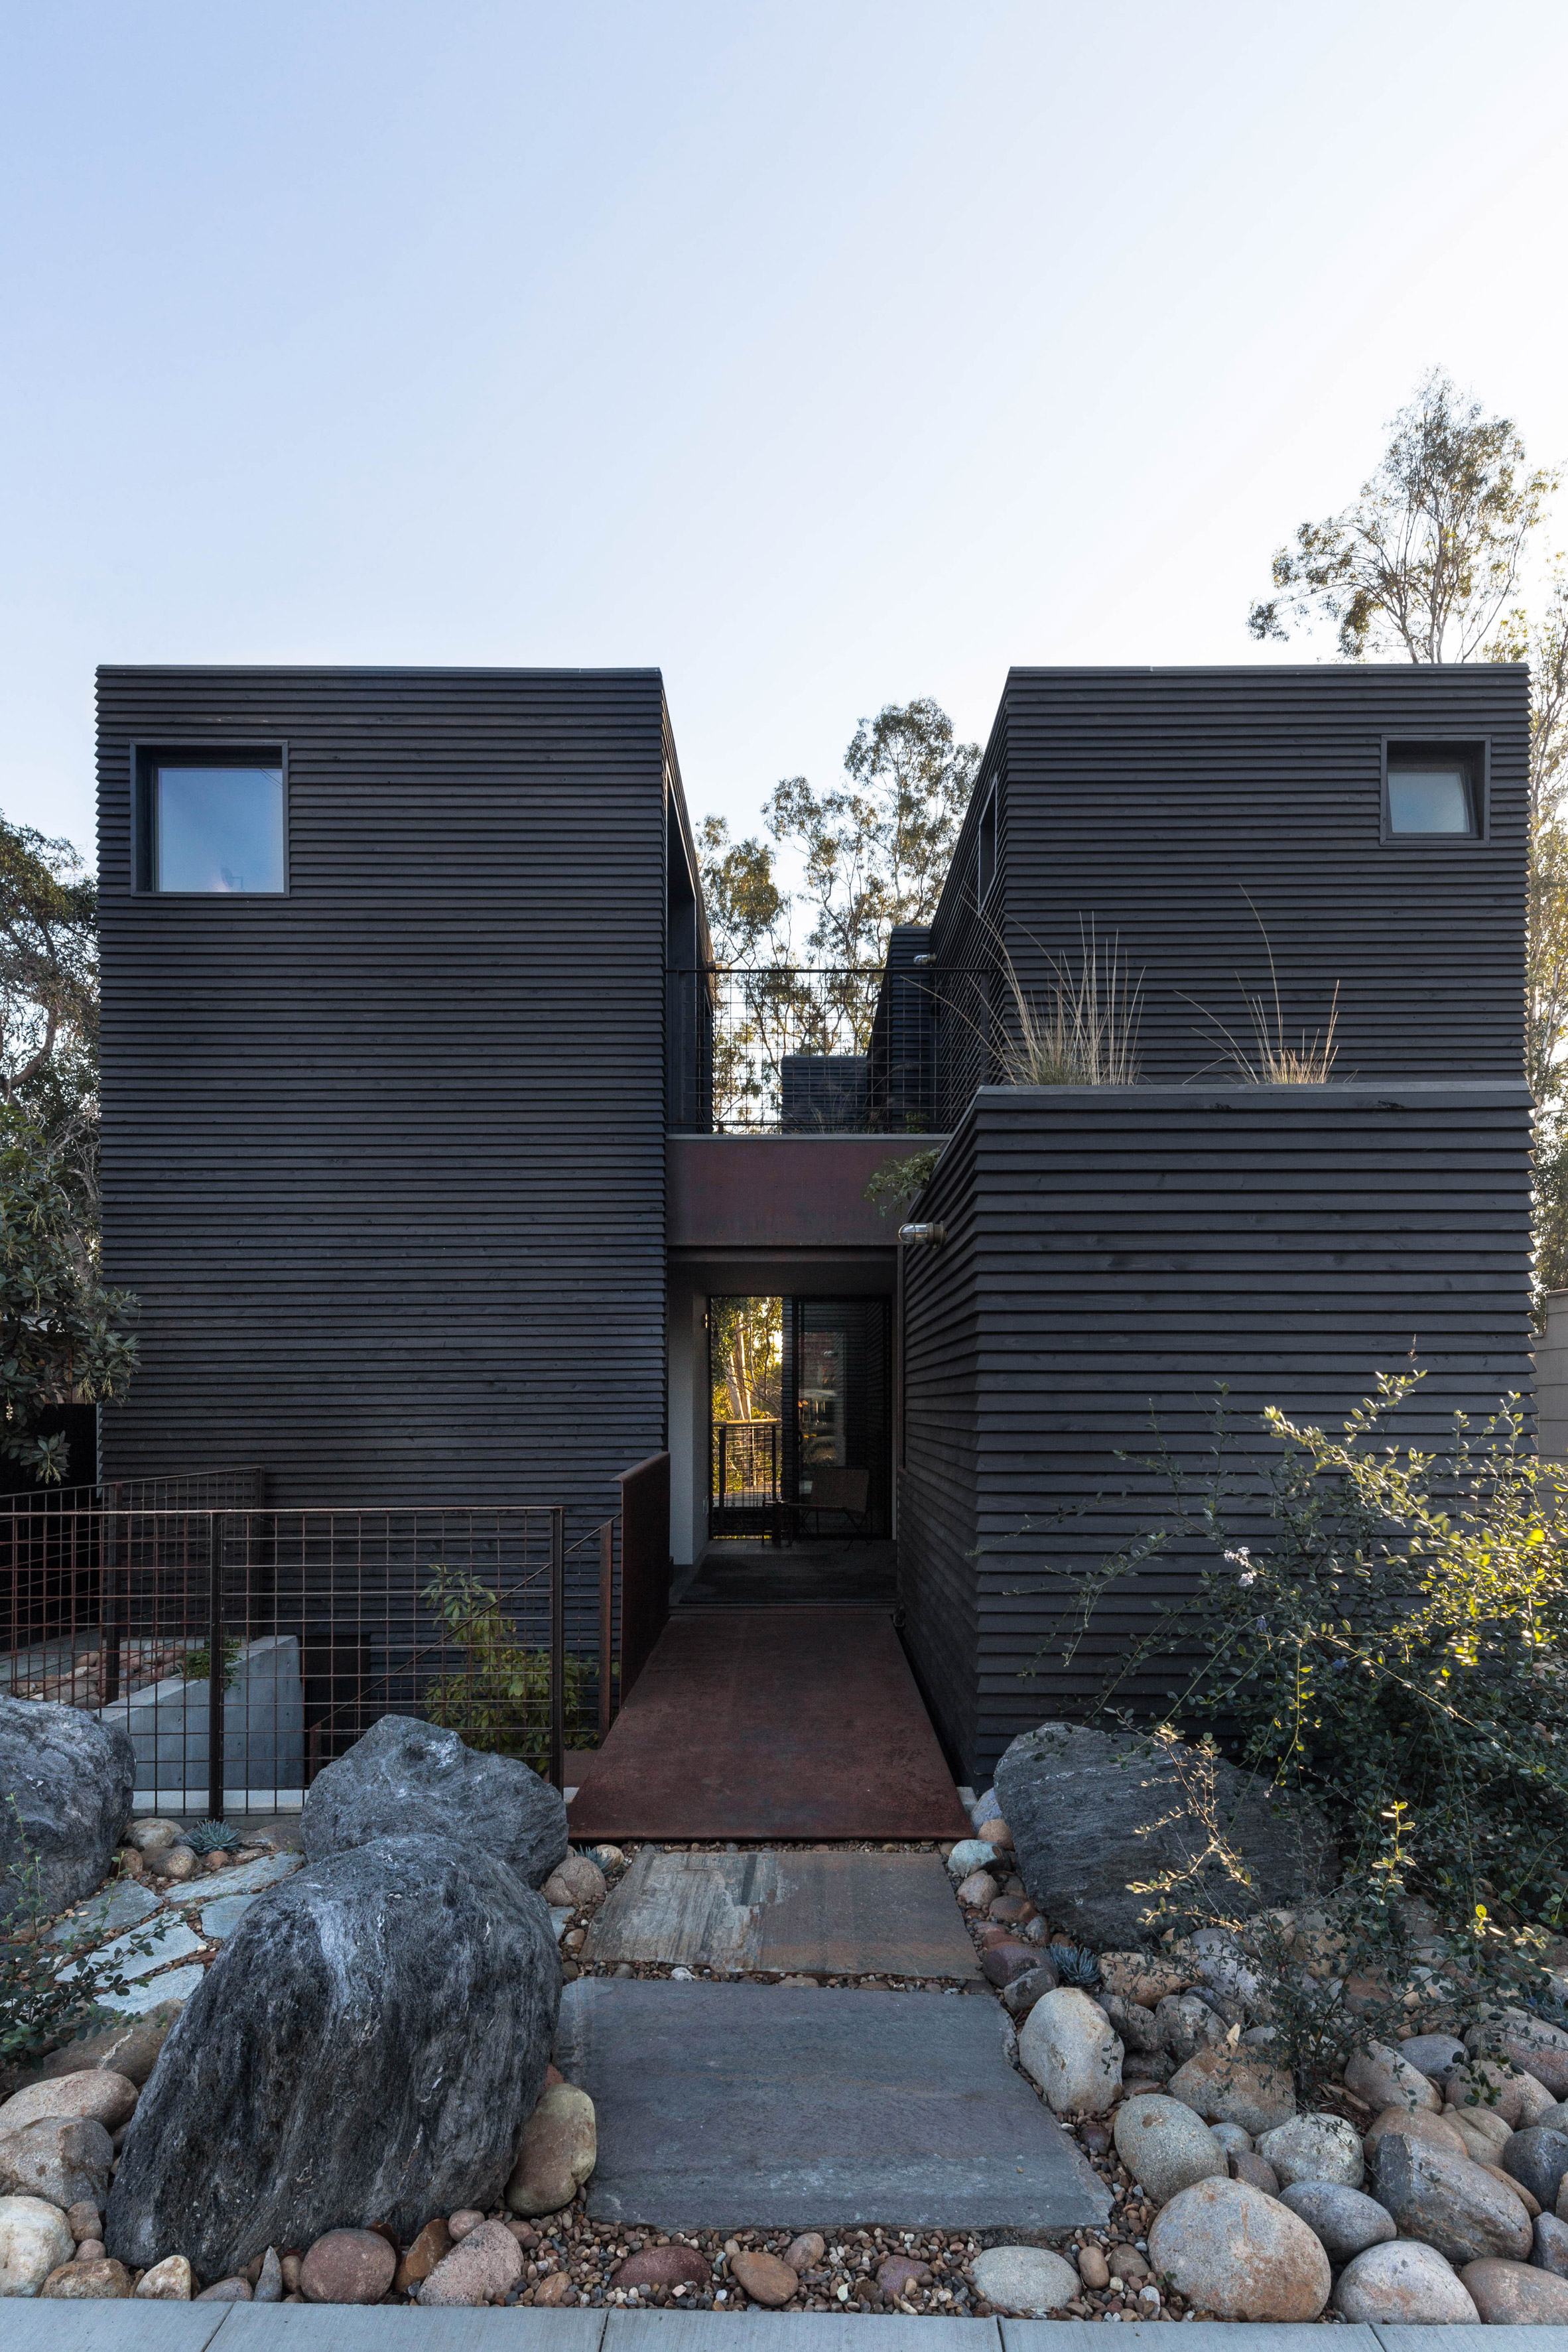 Jeff Svitak builds blackened Redwood House with private studio for himself in Southern California